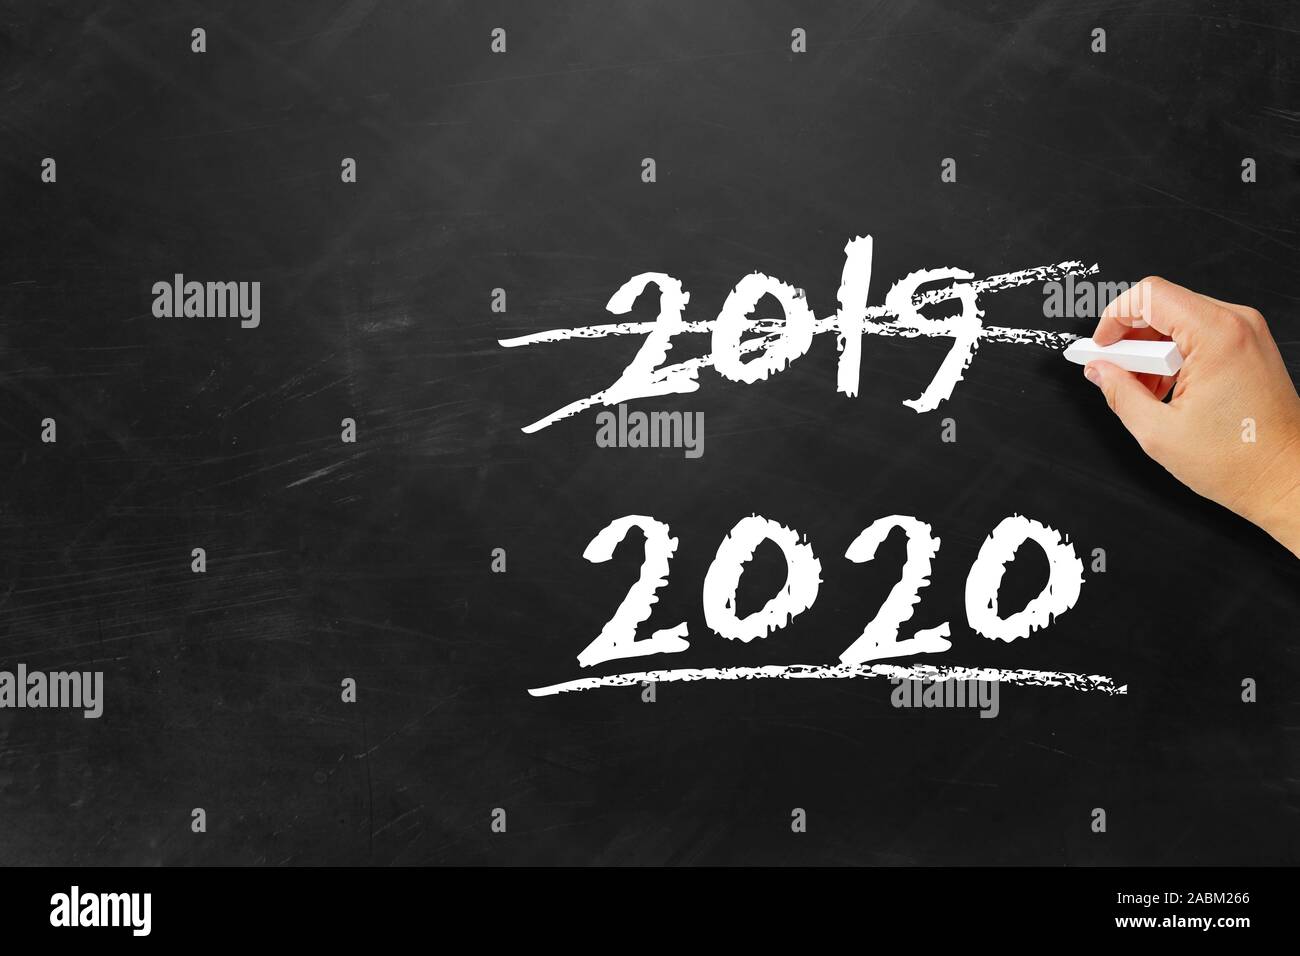 Cancel the old year 2019 and welcome the new year 2020 Stock Photo